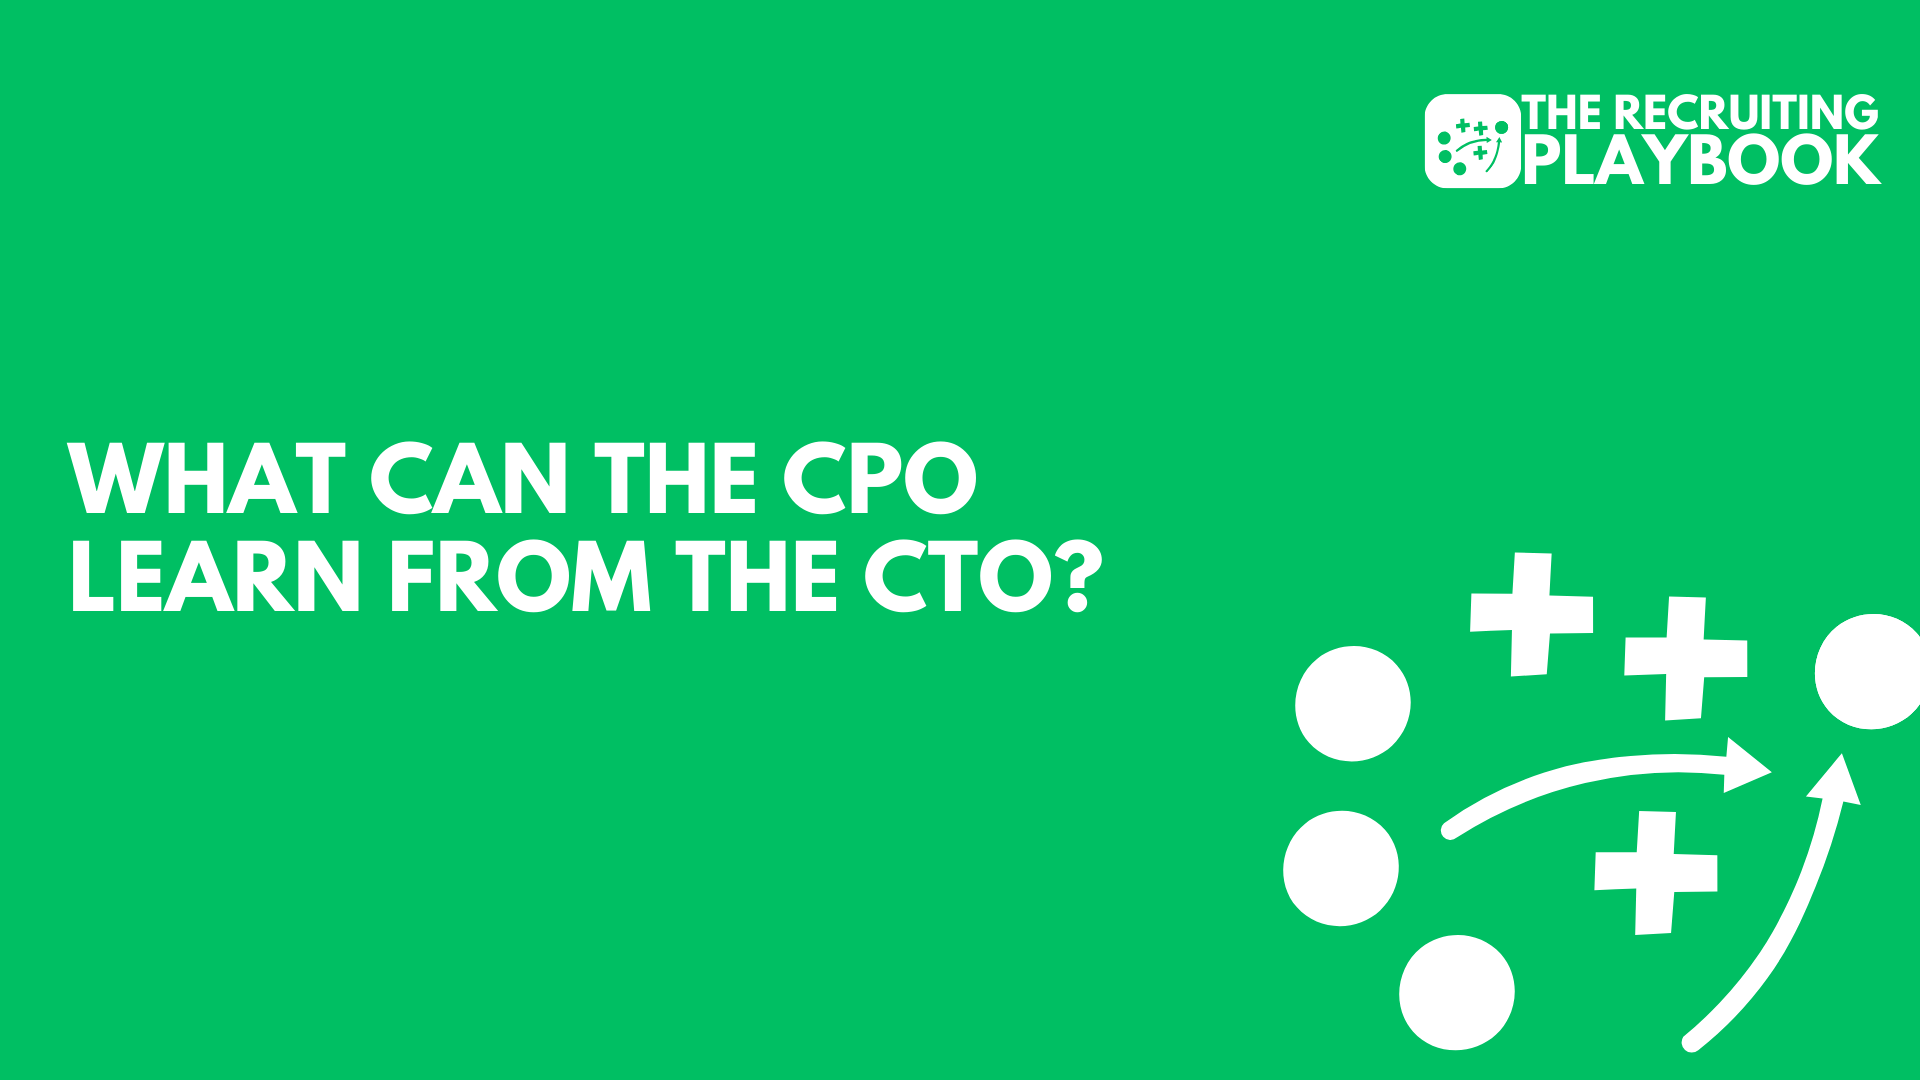 What can the CPO learn from the CTO?